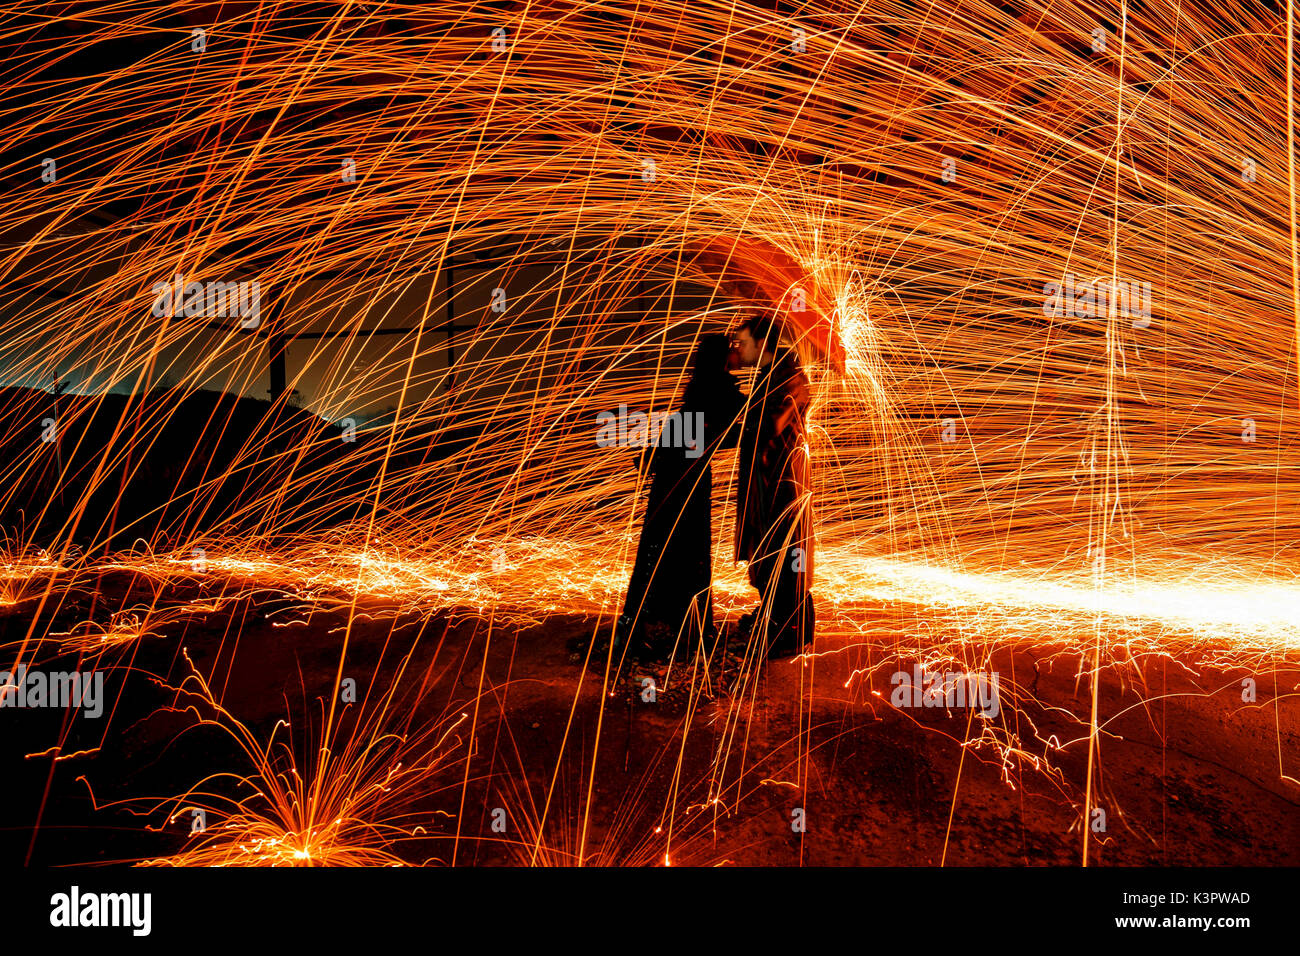 Couple under an umbrella to shelter from a shower of incandescent sparks created by the technique of steel wool, emilia romagna, italy Stock Photo